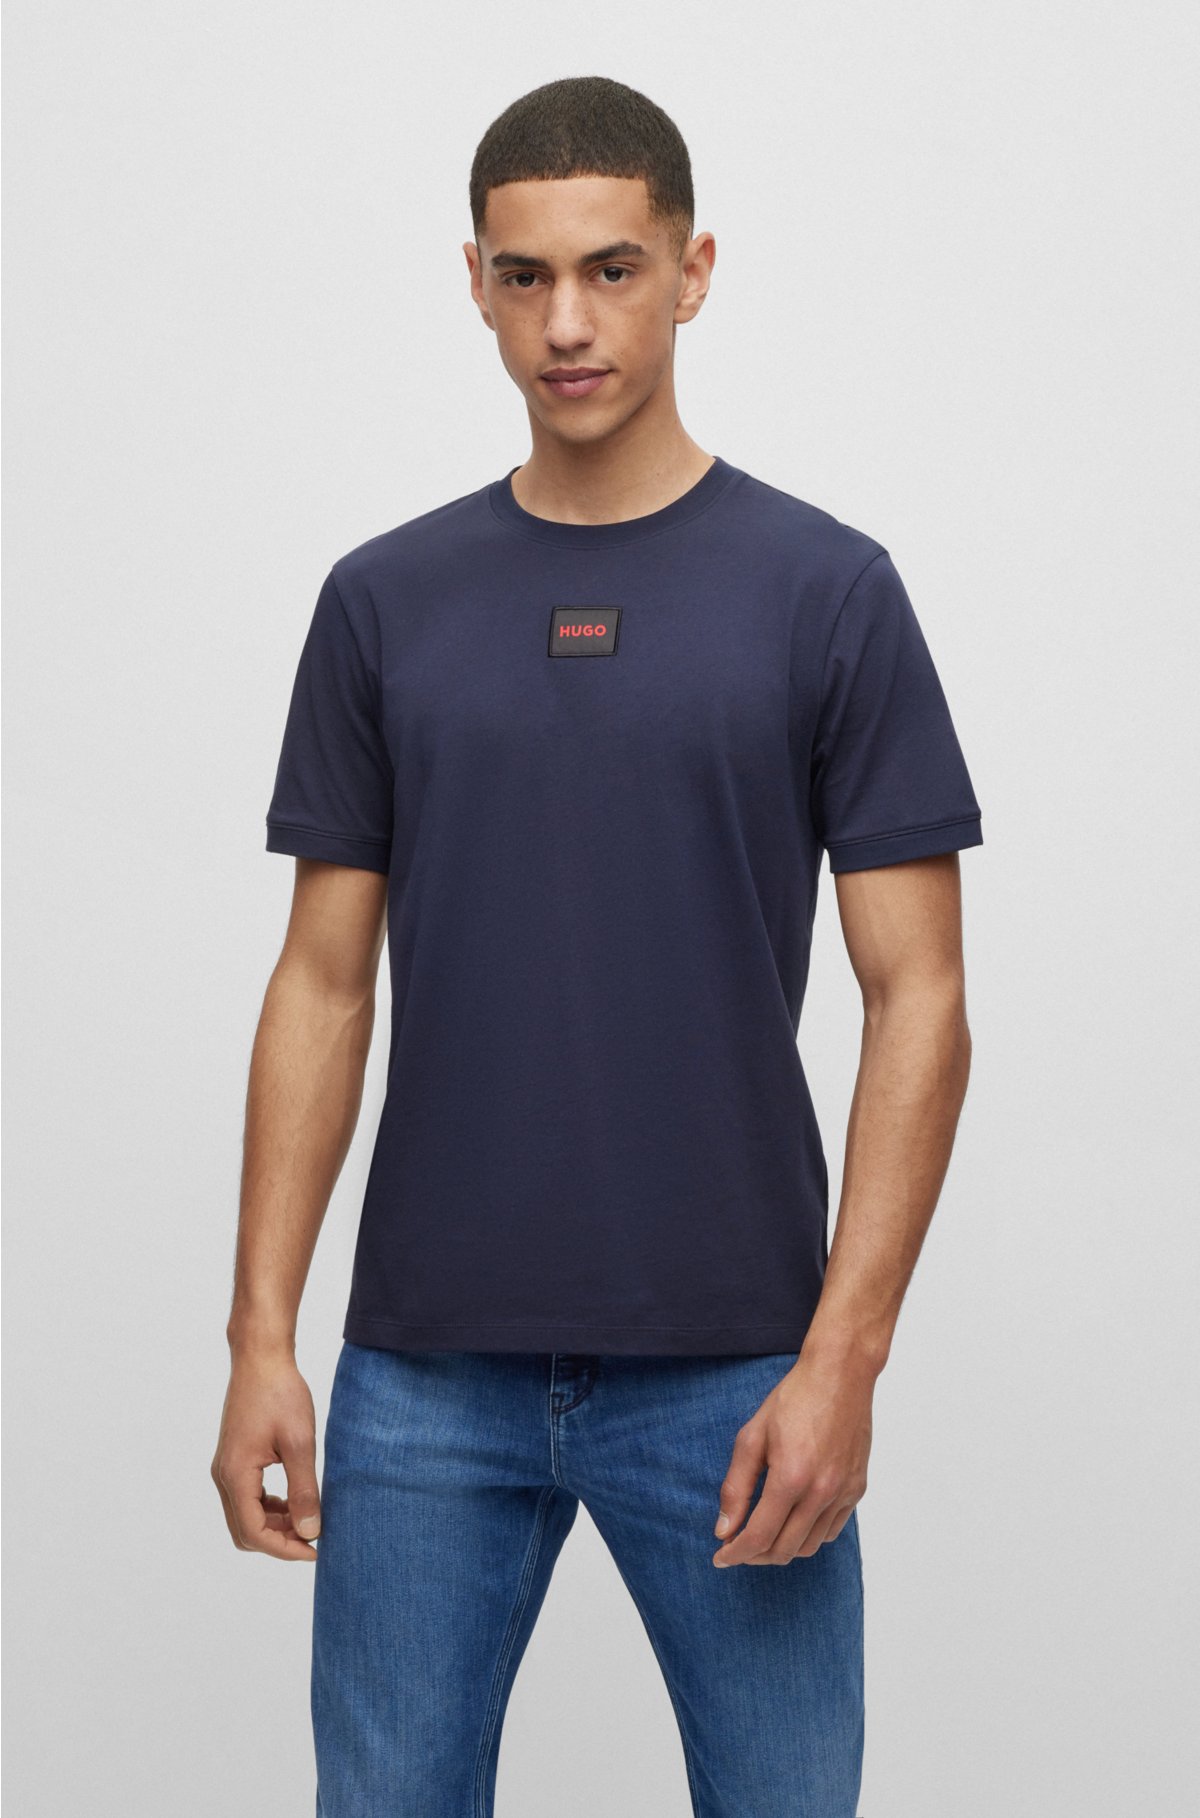 BOSS by HUGO BOSS Regular-fit Pure-cotton T-shirt With